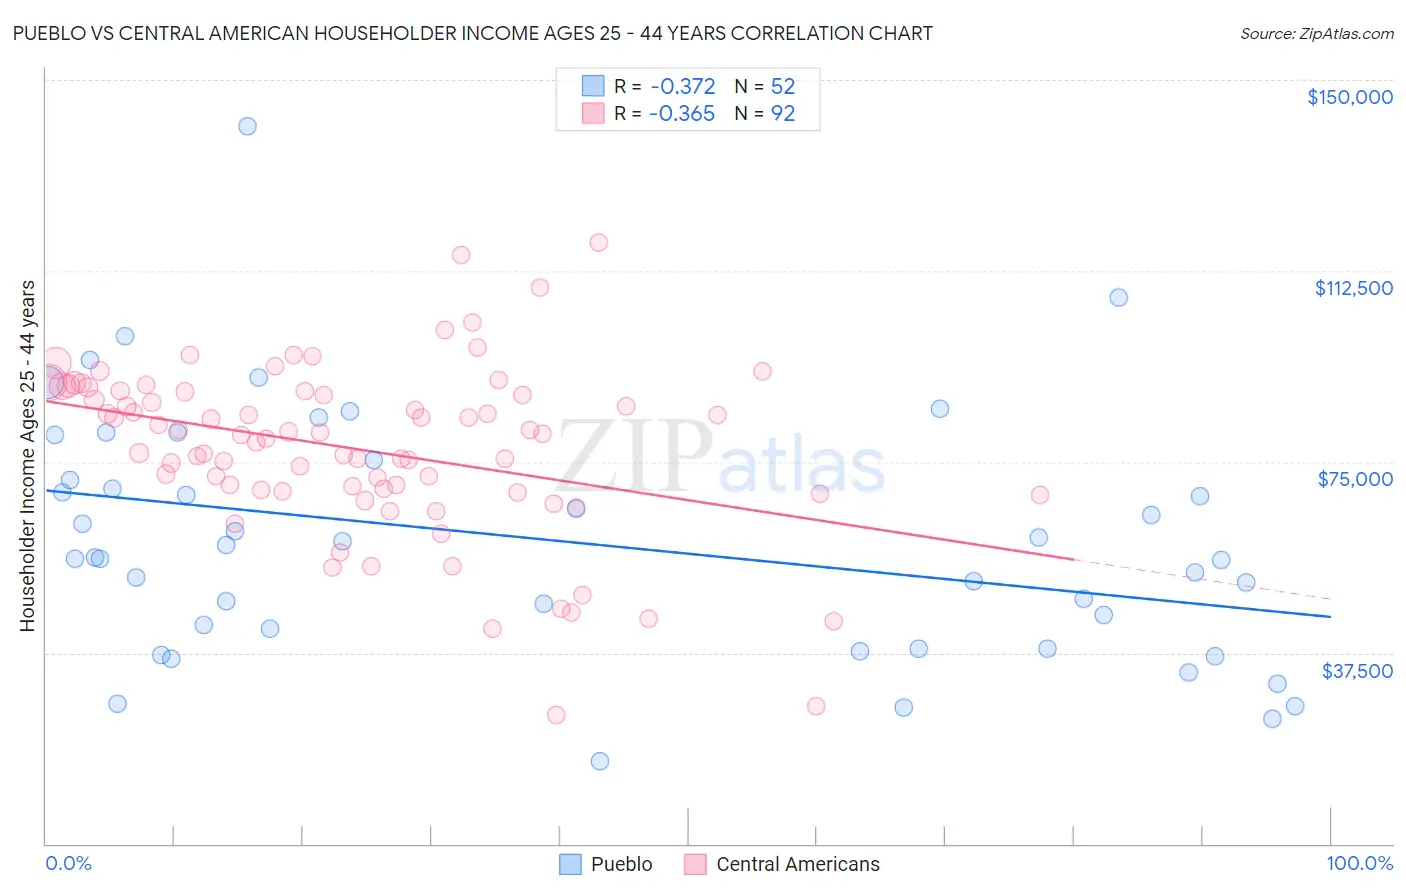 Pueblo vs Central American Householder Income Ages 25 - 44 years